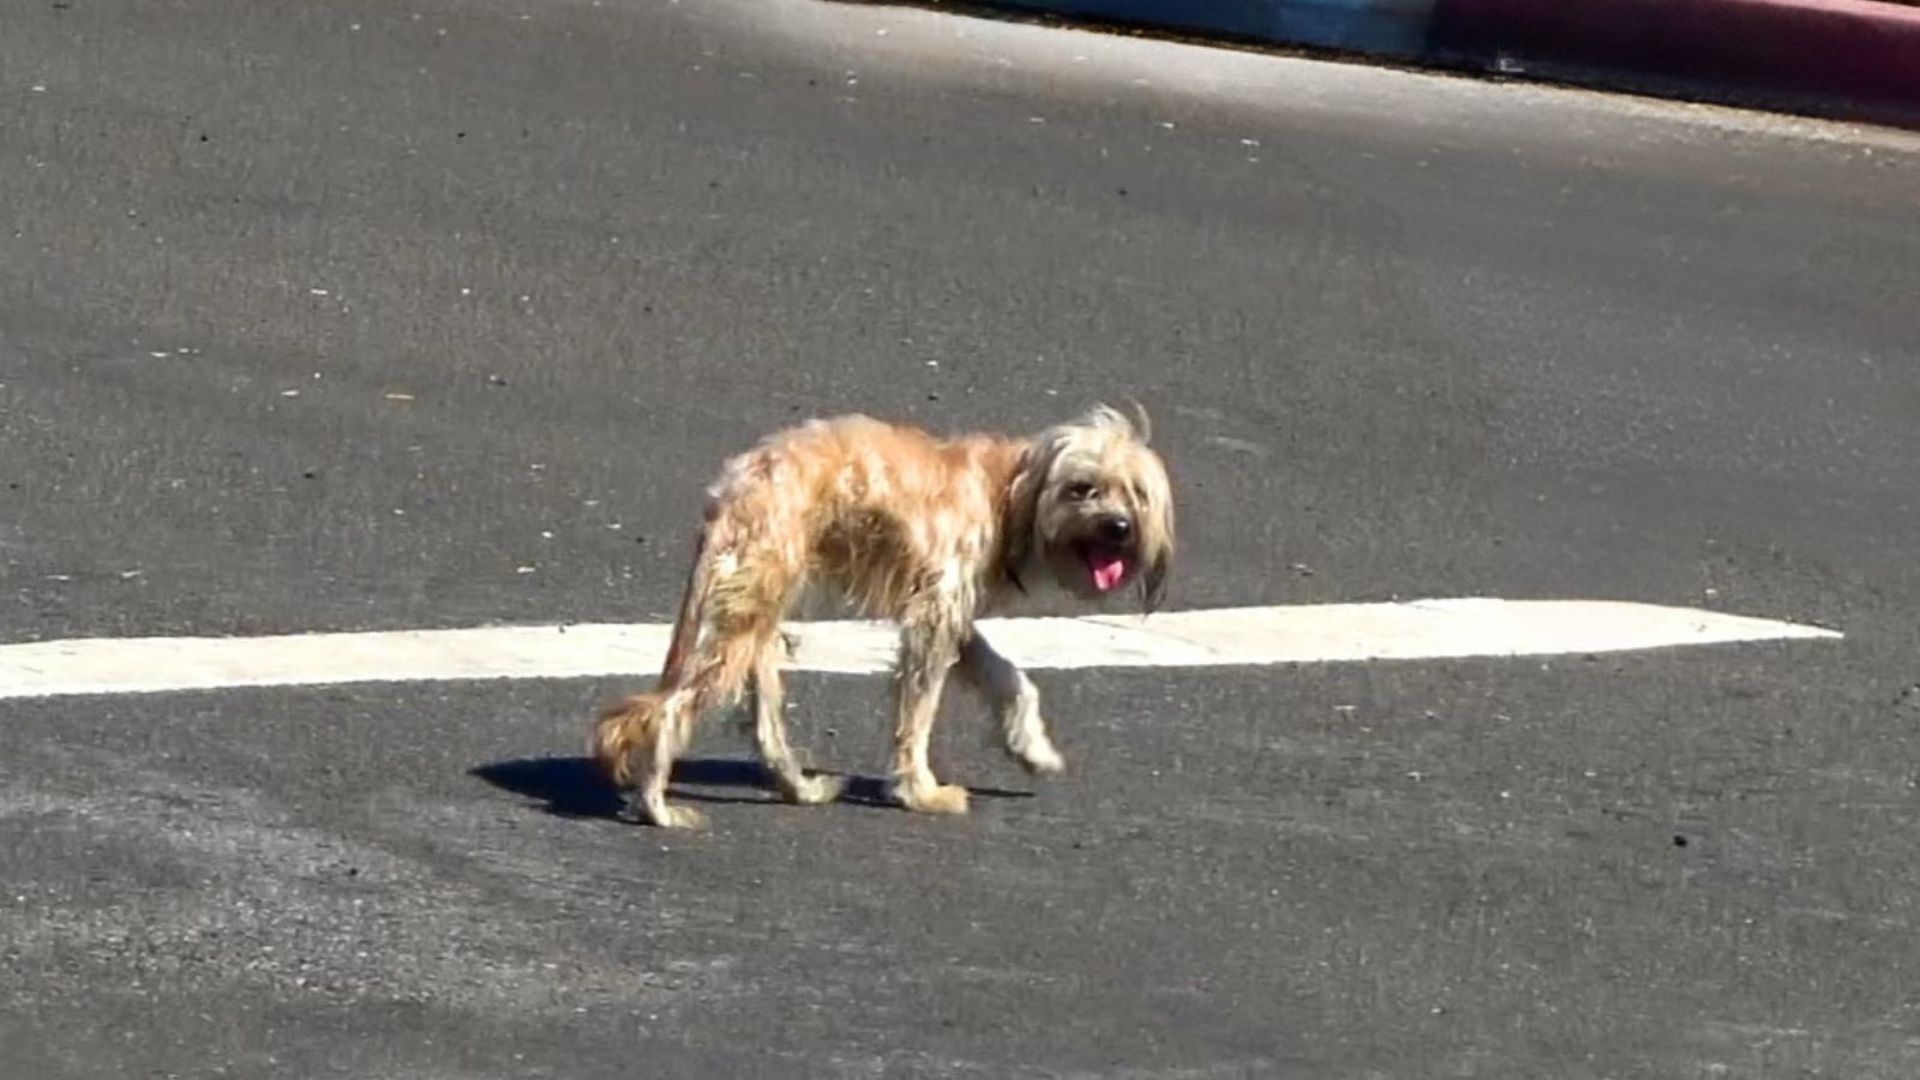 The Injured Dog Was Too Scared Of Humans To Accept Help After Being Hit By A Car